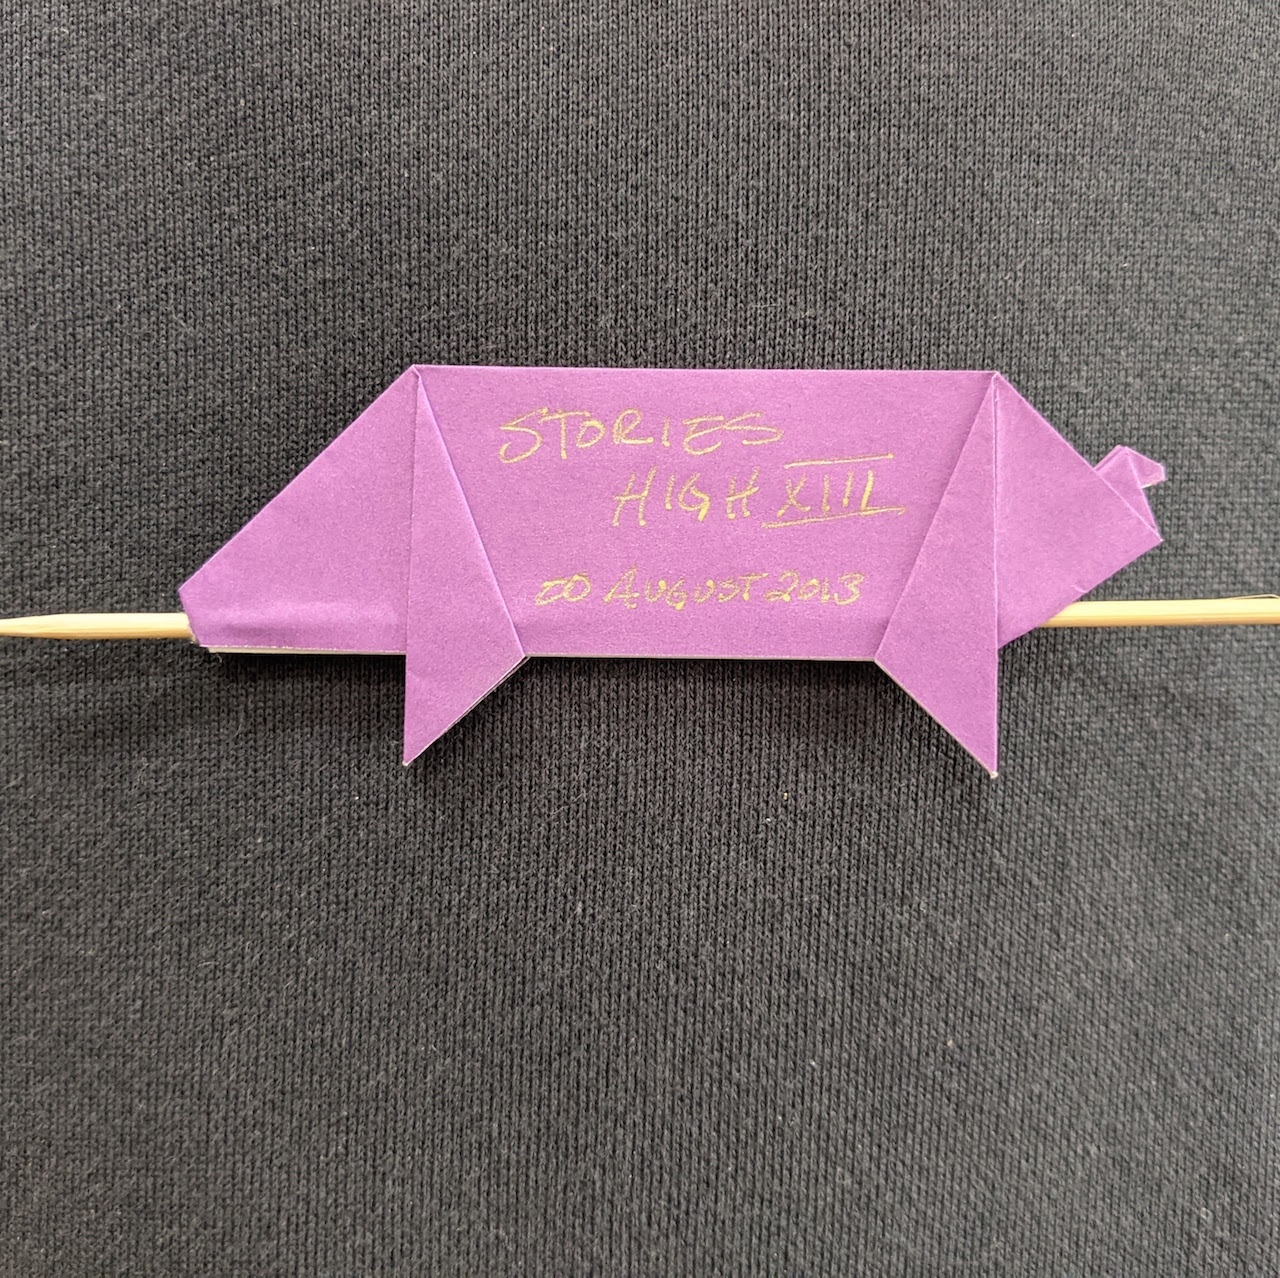 A closing night gift of an 2 inch origami of a lechon on a toothpick given to EVERYONE involved with Stories High 13, the annual page-to-stage festival produced by Bindlestiff Studio, San Francisco, CA